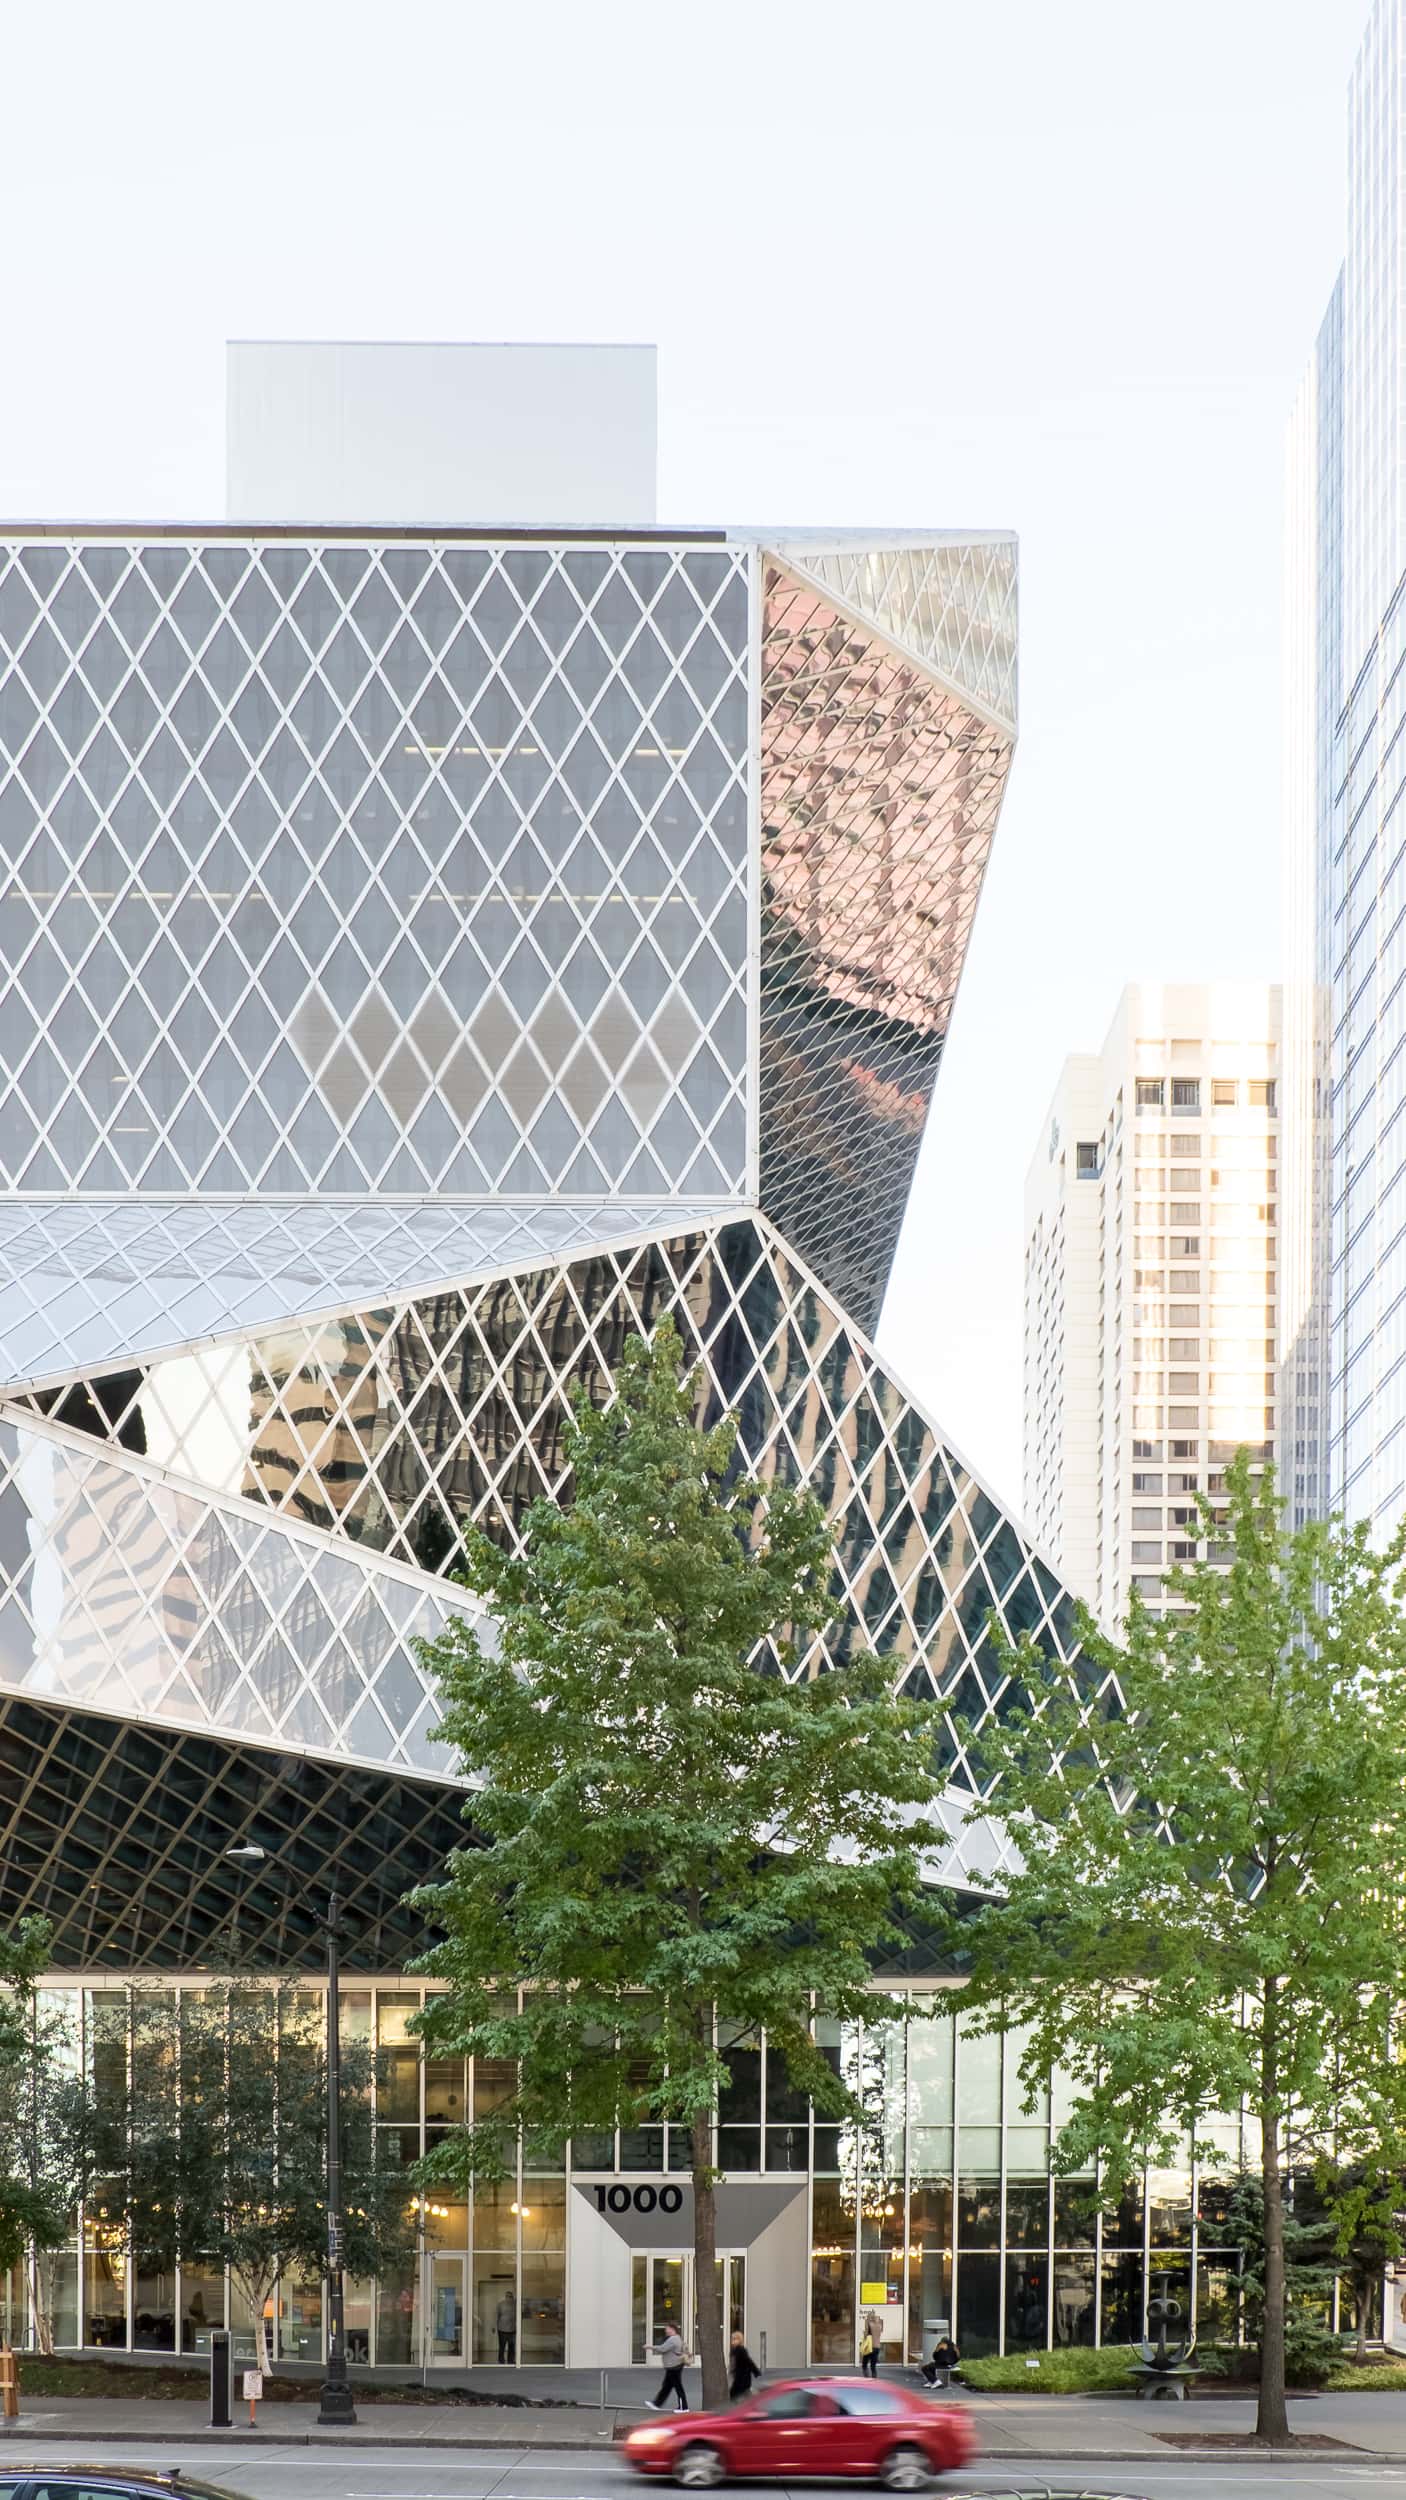 Architectural photography of the Seattle Central Library designed by OMA featuring a one point perspective of the exterior bathed in bright afternoon light as a red car drives past